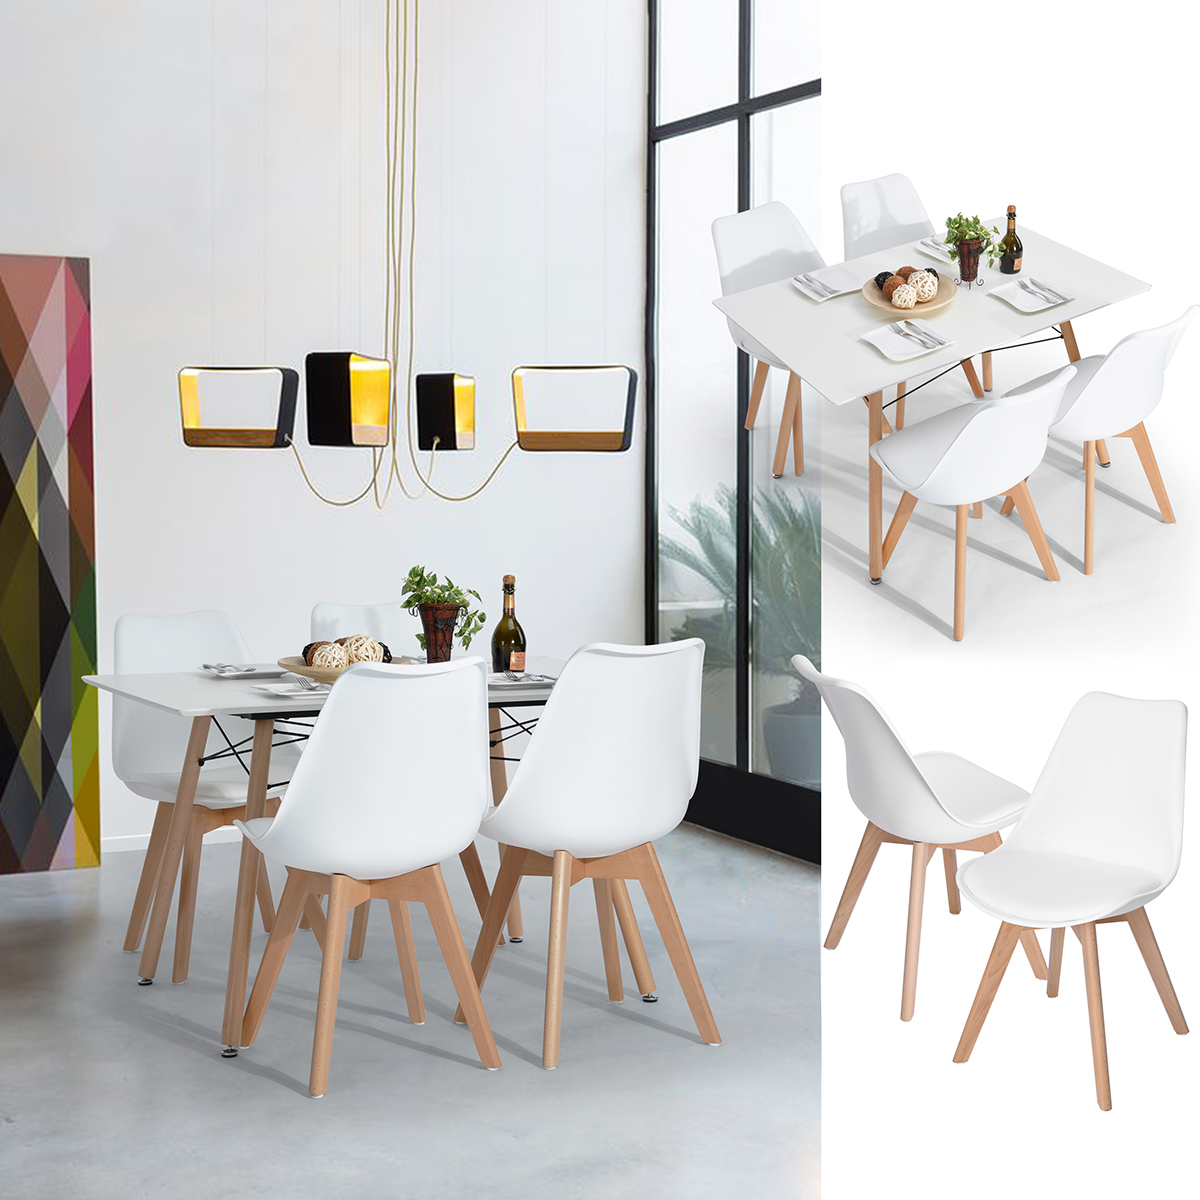 Set of 4 Dining Chairs PU Leather Solid Wood Beech Legs, White